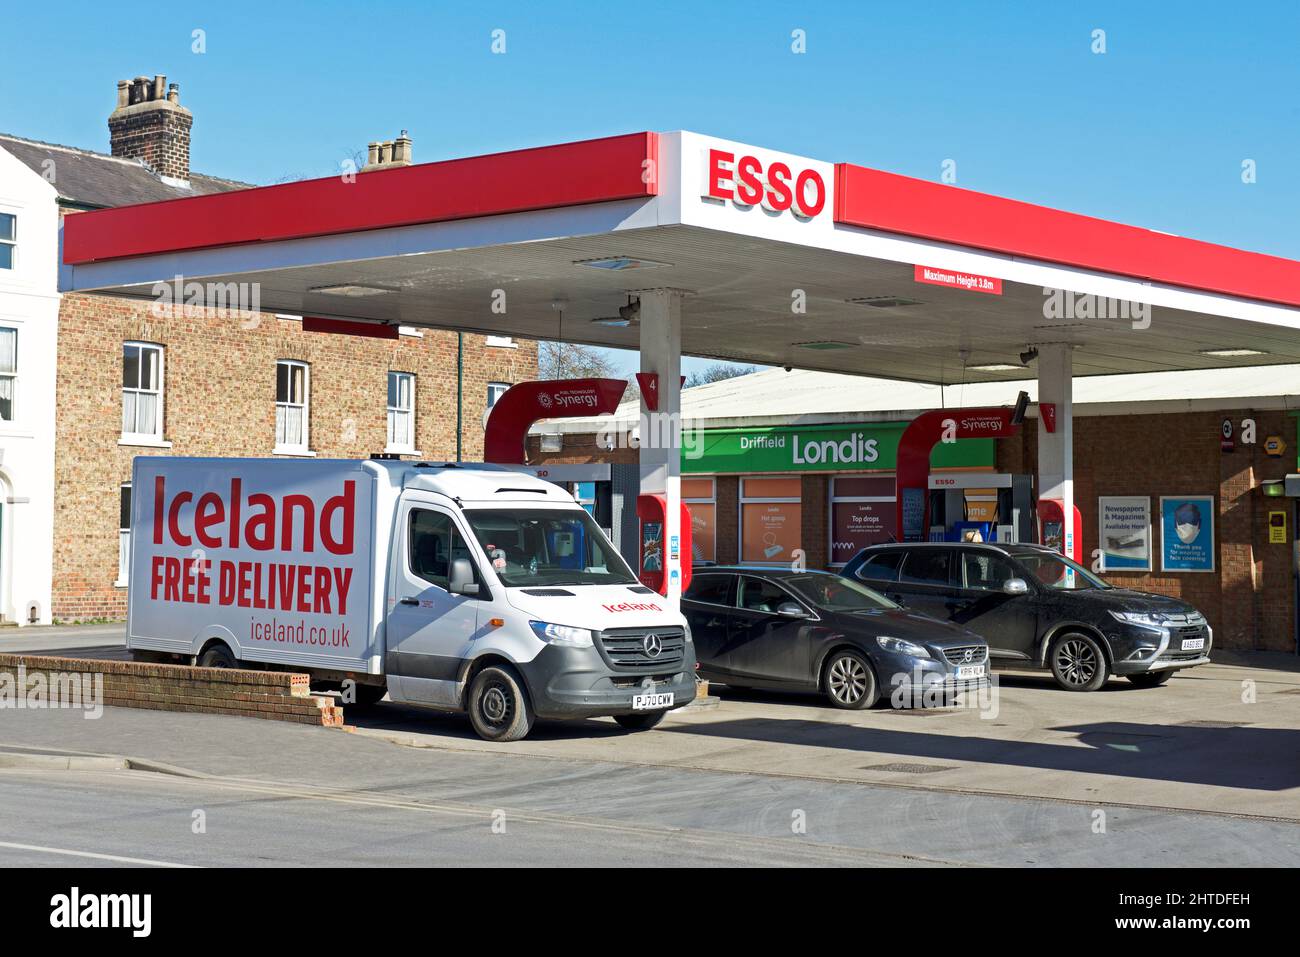 Iceland delivery van filling up at Esso petrol station in Driffield, East Yorkshire, England UK Stock Photo